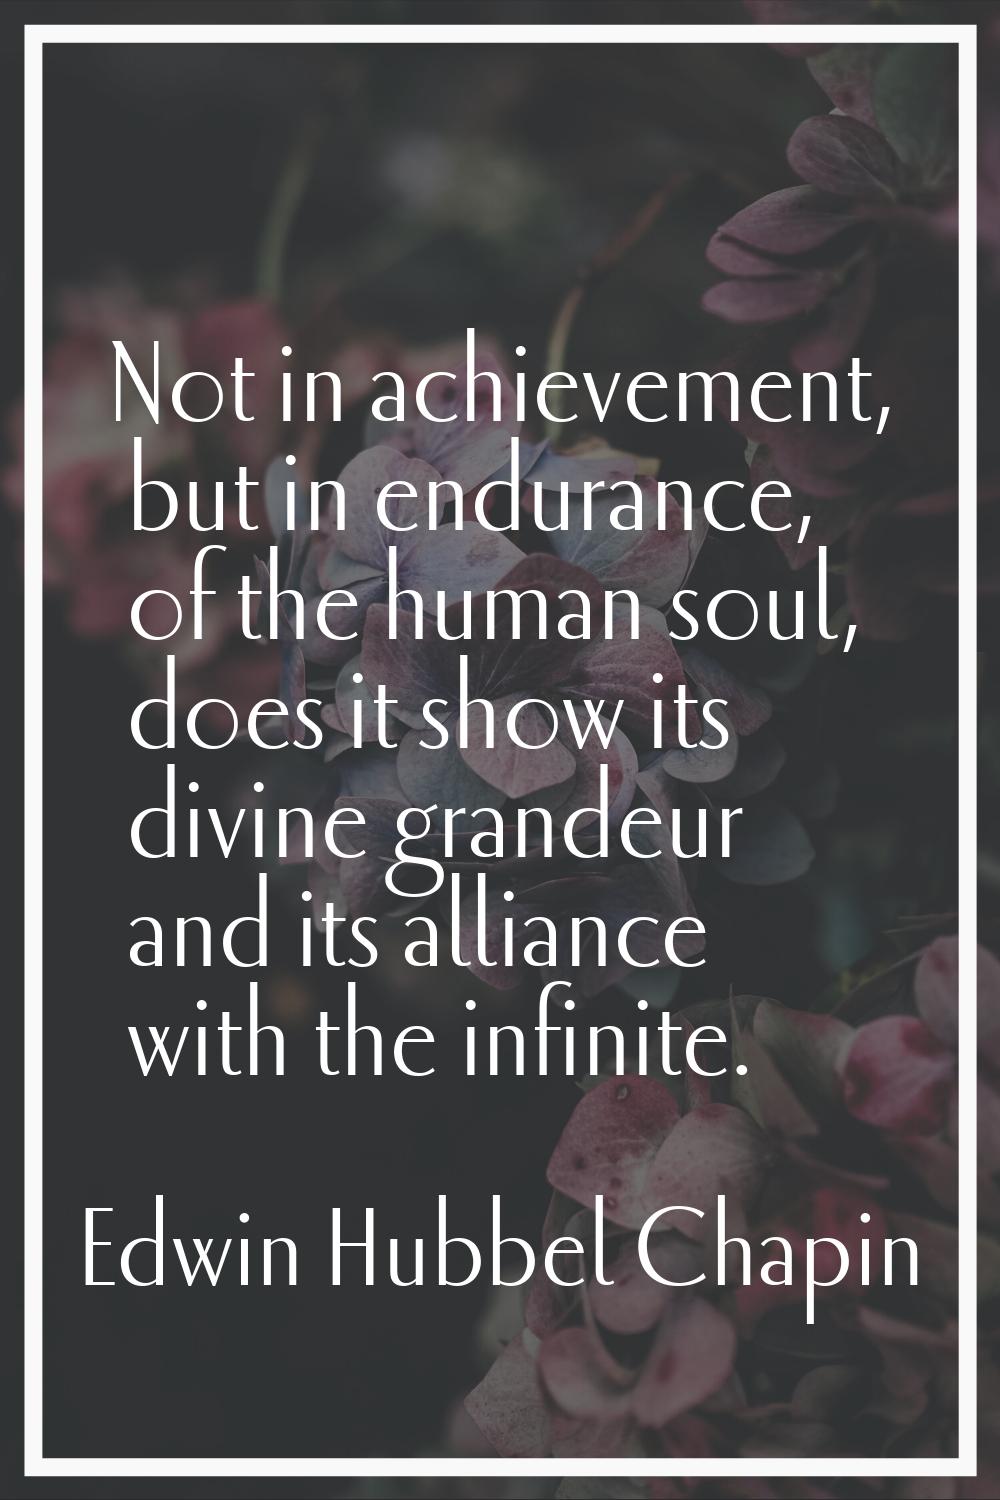 Not in achievement, but in endurance, of the human soul, does it show its divine grandeur and its a